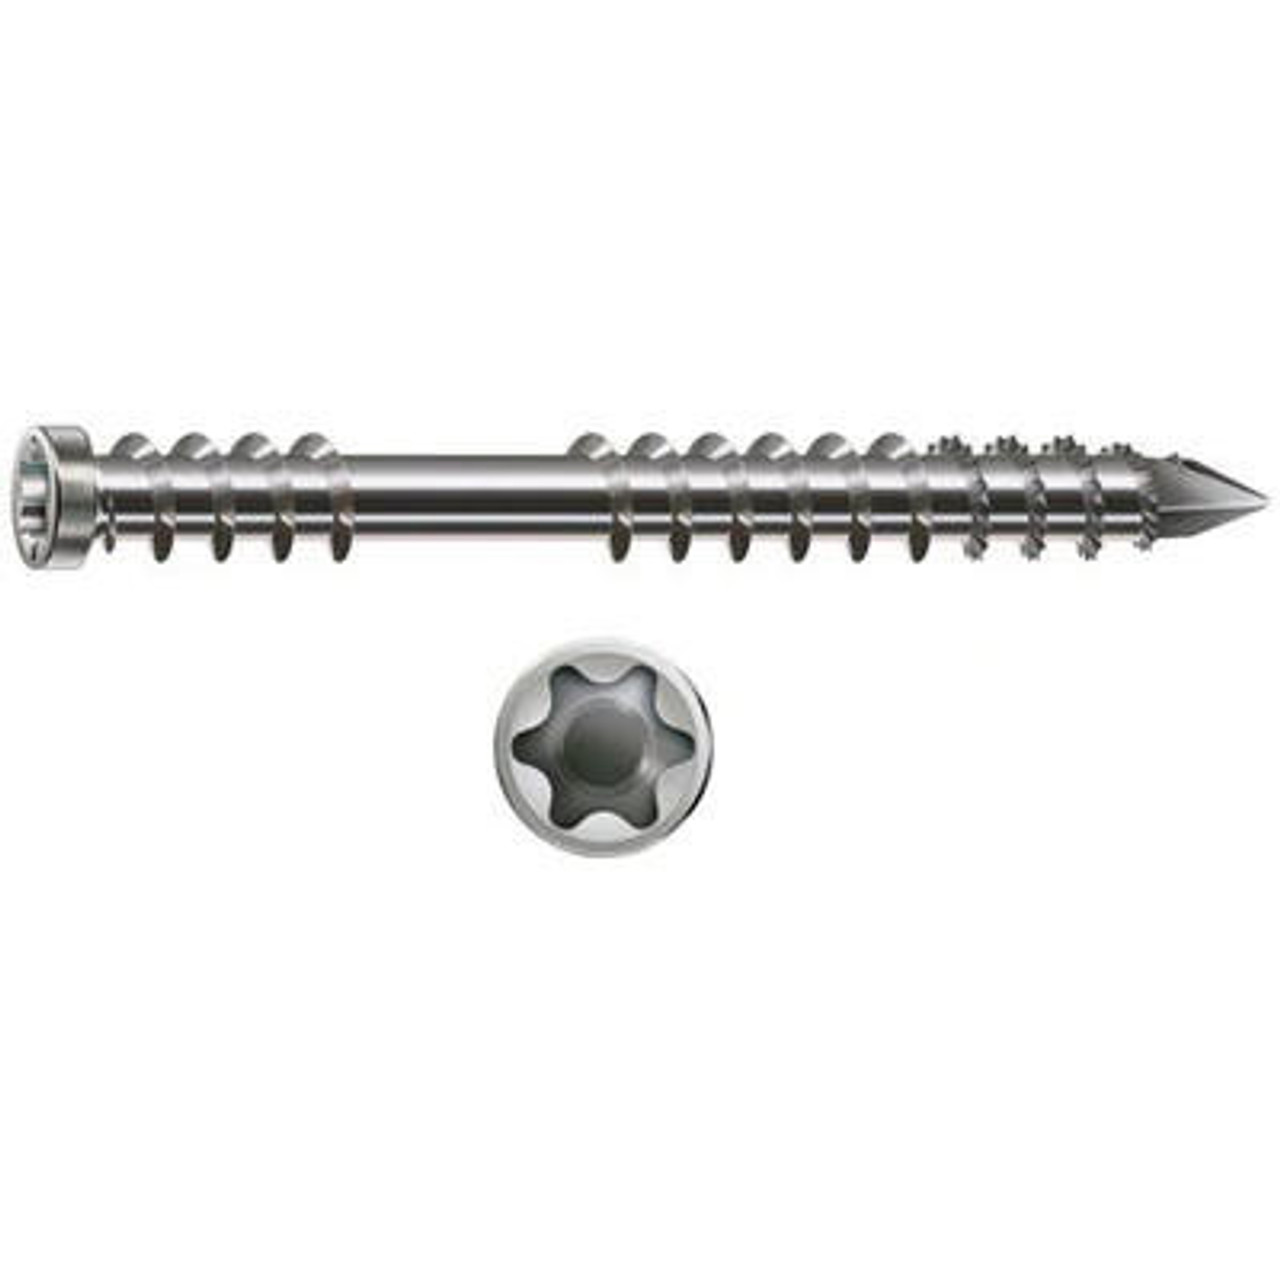 SPAX 60MM 10G 304 STAINLESS DECKING SCREWS VALUE PACK